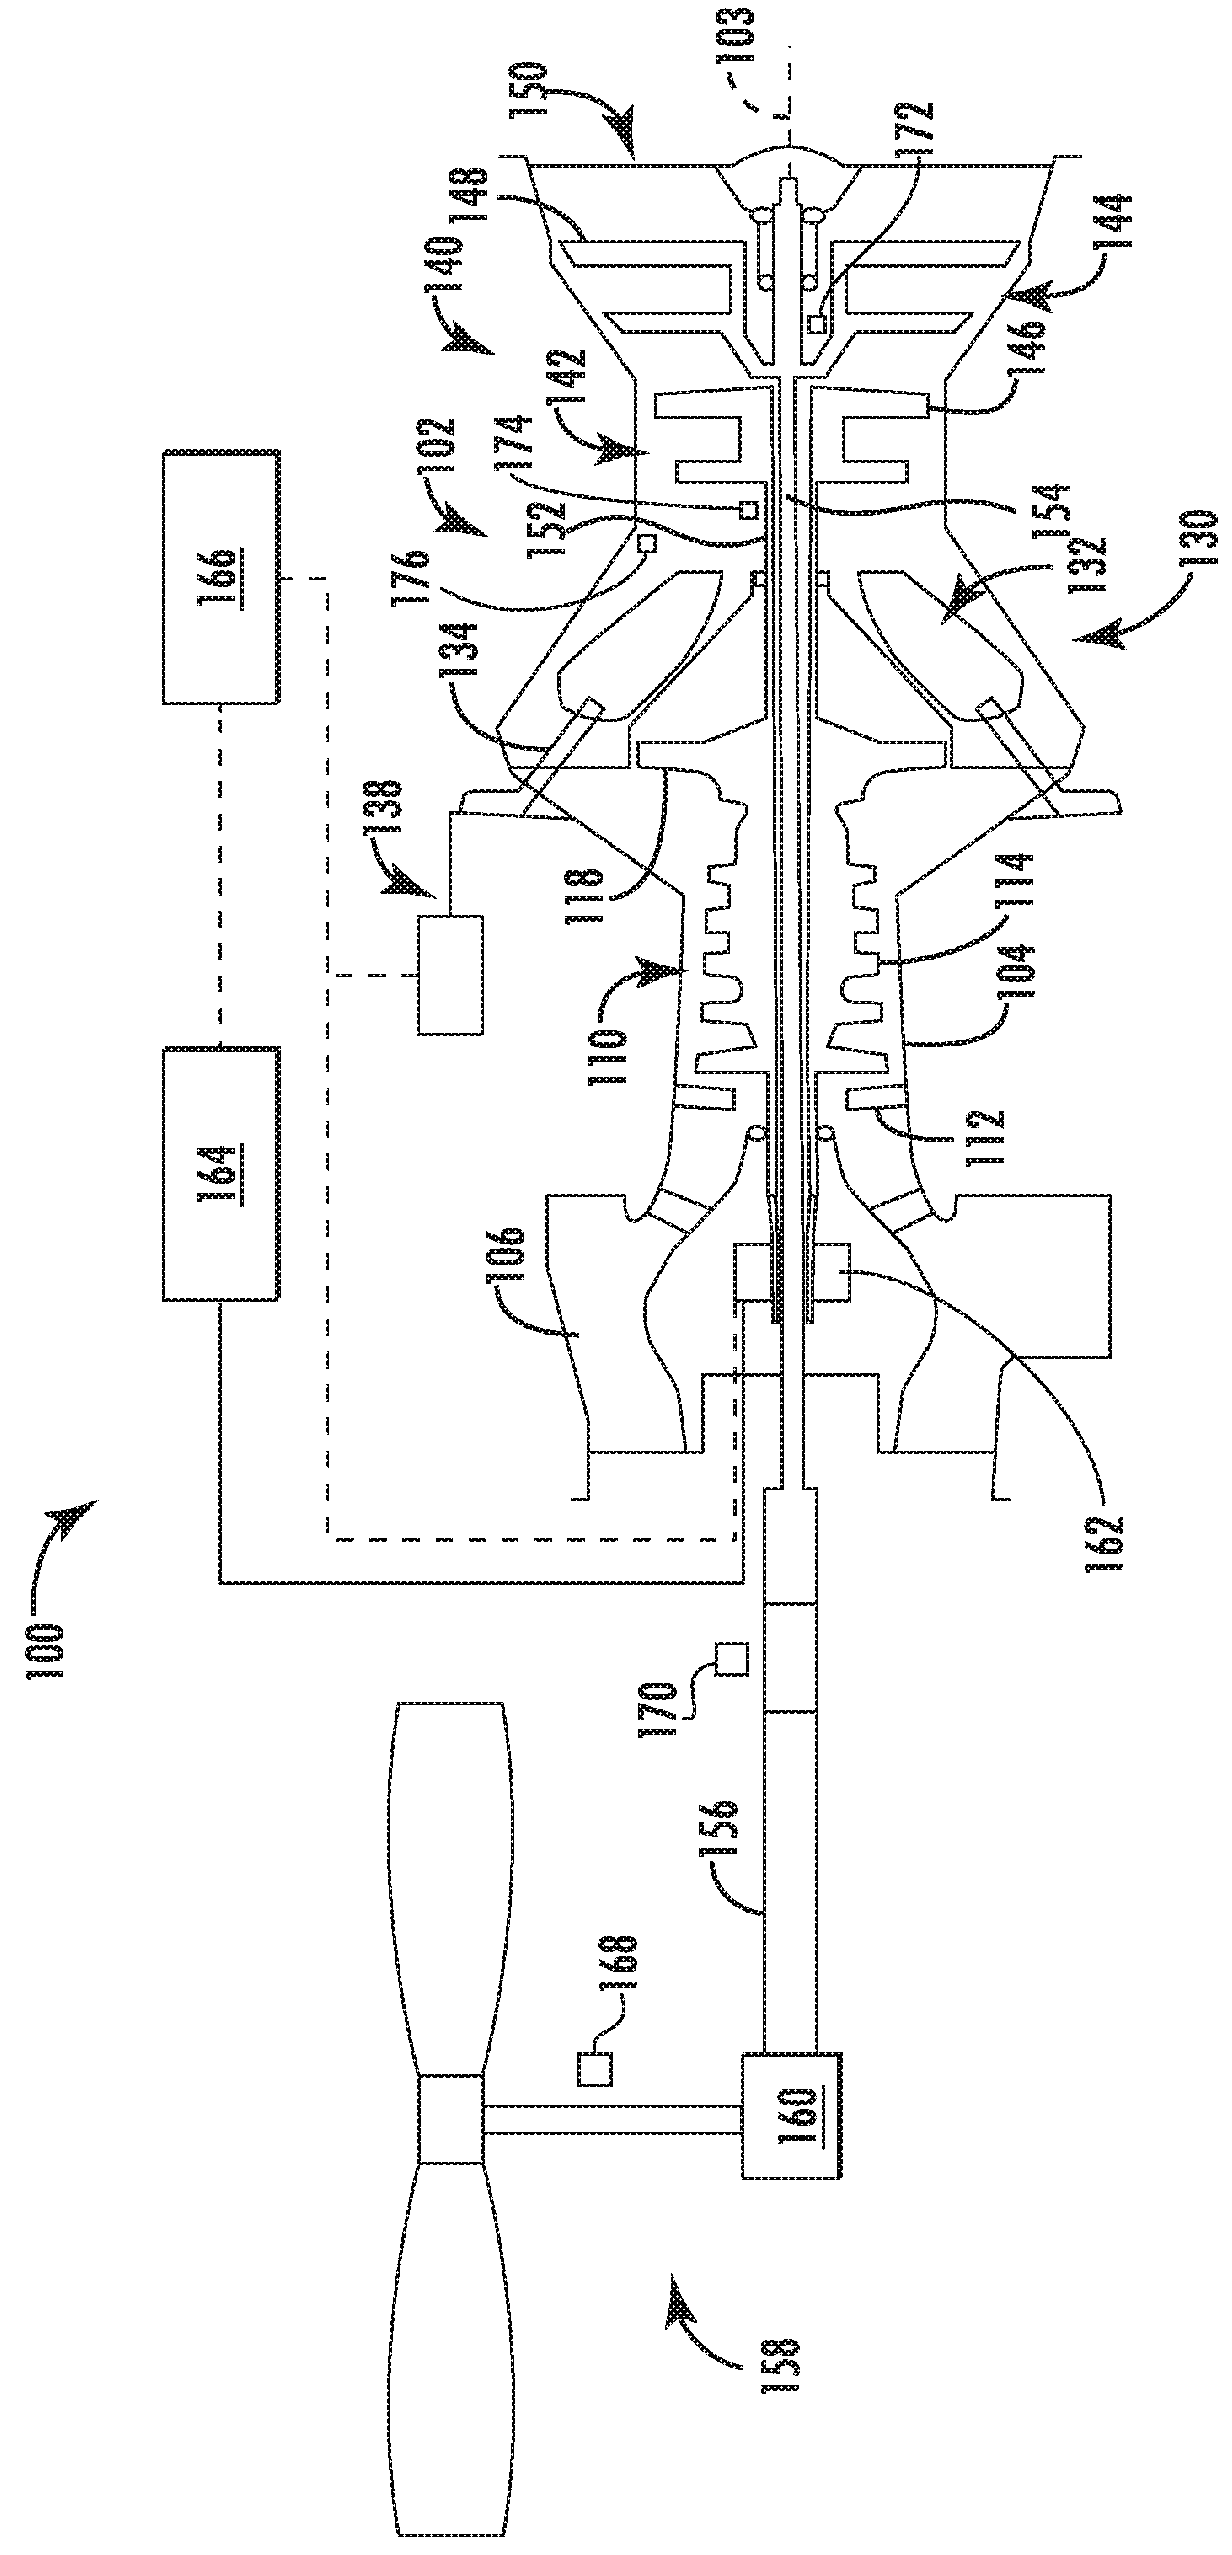 Propulsion system for an aircraft